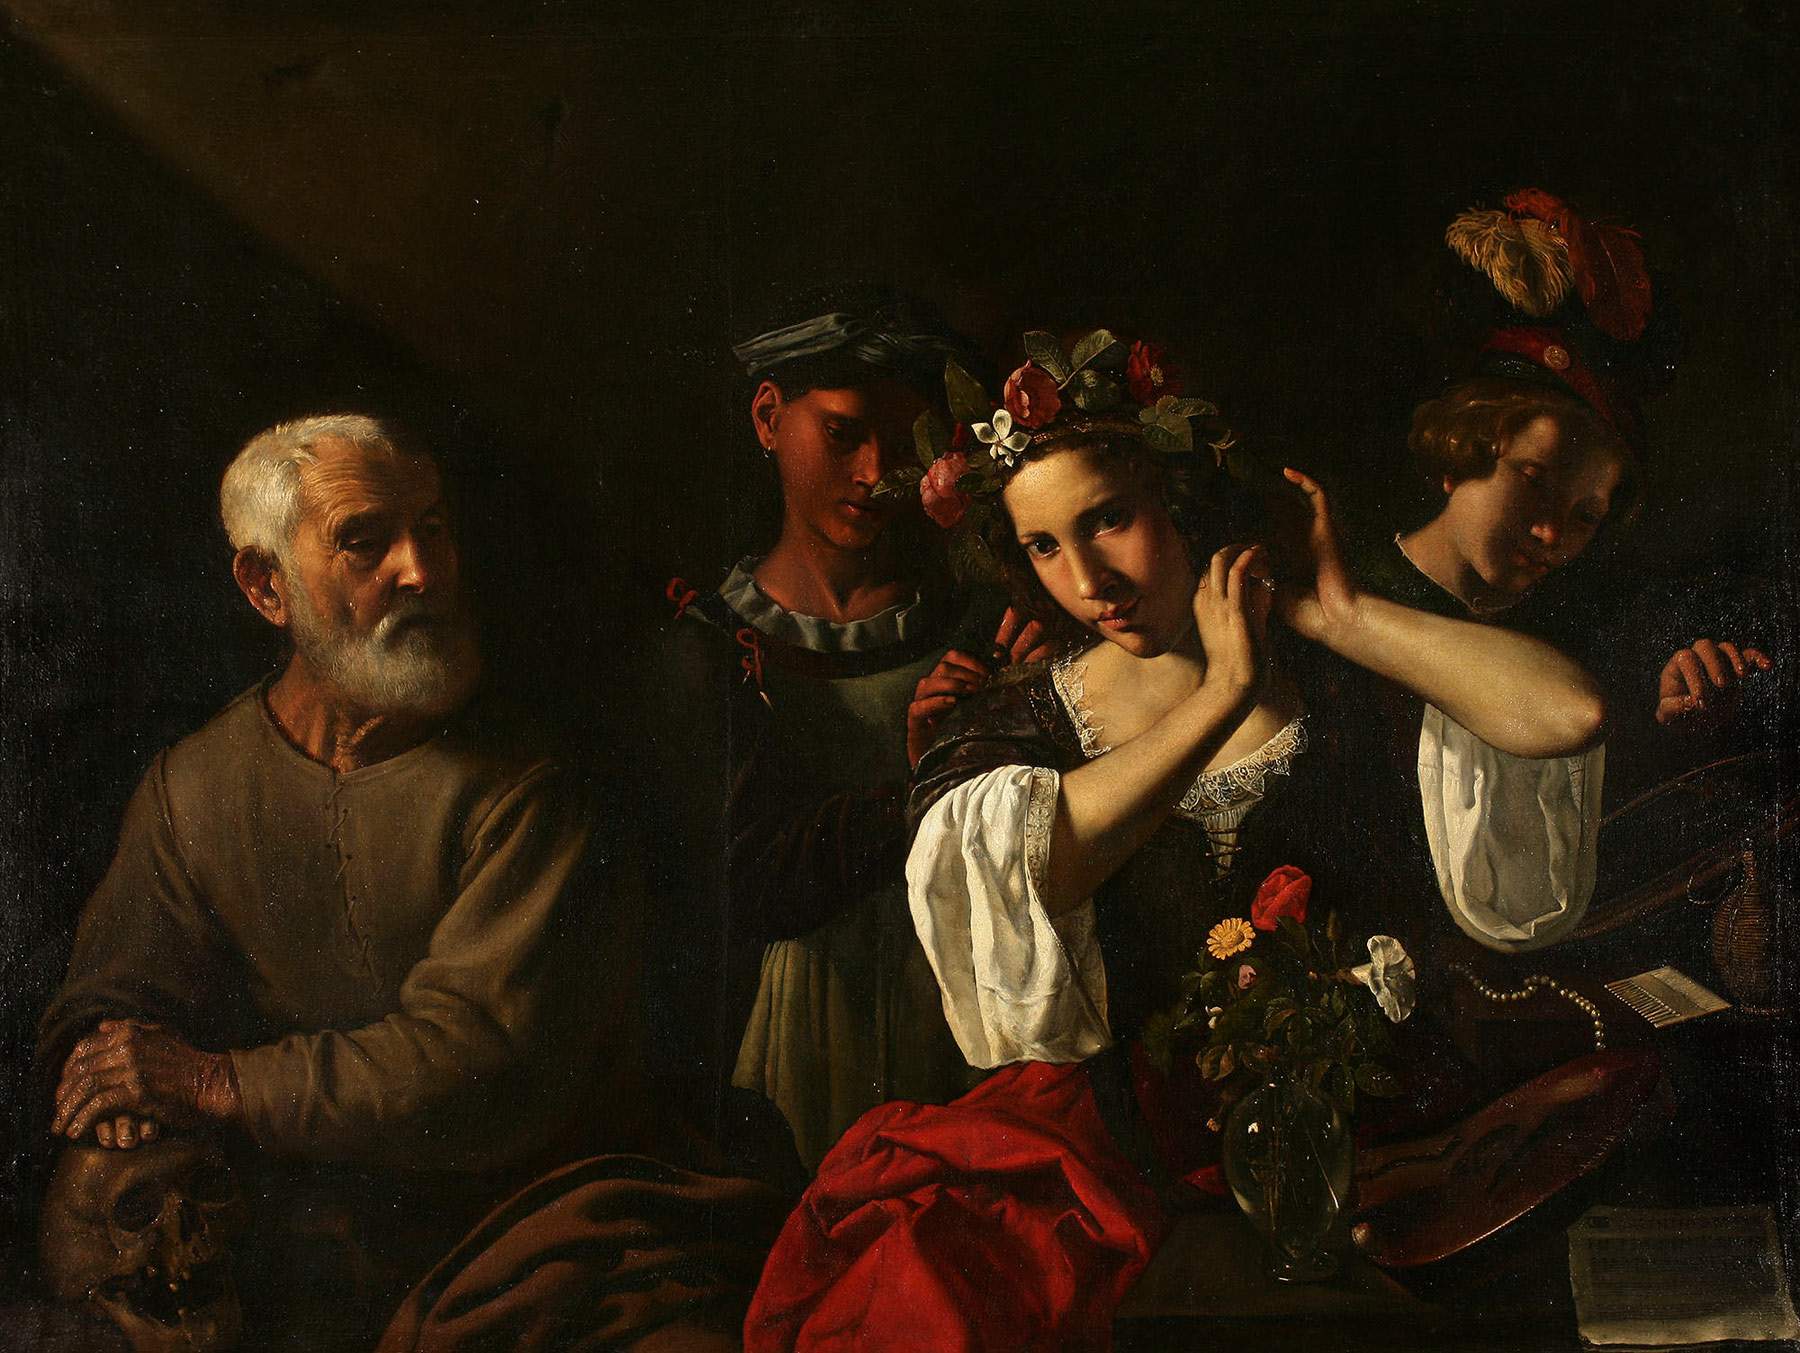 Lucca, a major exhibition on the Lucca Caravaggesque painters. Also featuring works by Caravaggio